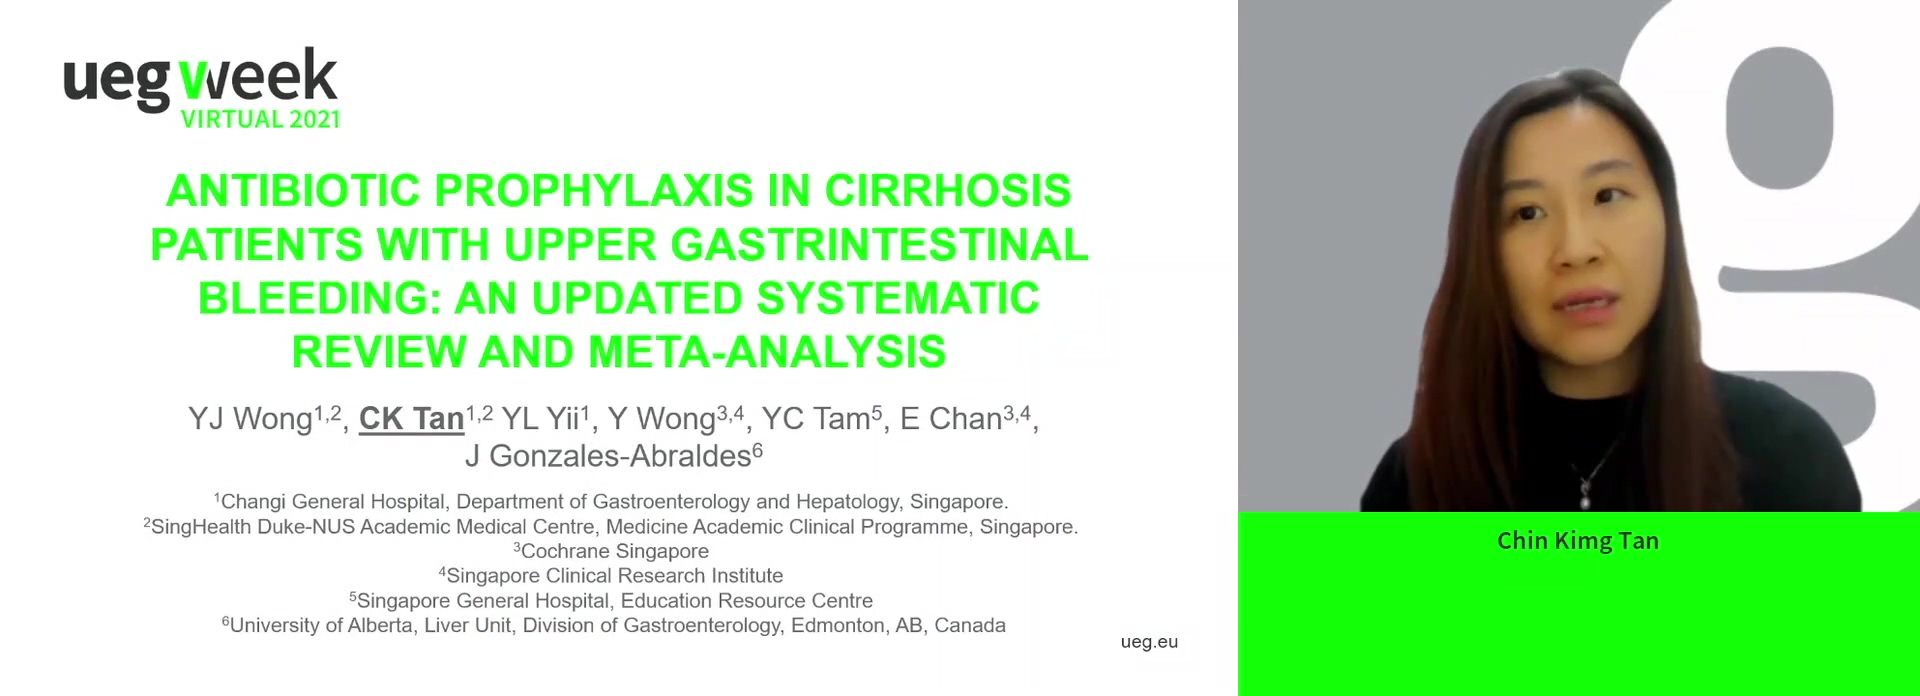 ANTIBIOTIC PROPHYLAXIS IN CIRRHOSIS PATIENTS WITH UPPER GASTROINTESTINAL BLEEDING: AN UPDATED SYSTEMATIC REVIEW AND META-ANALYSIS